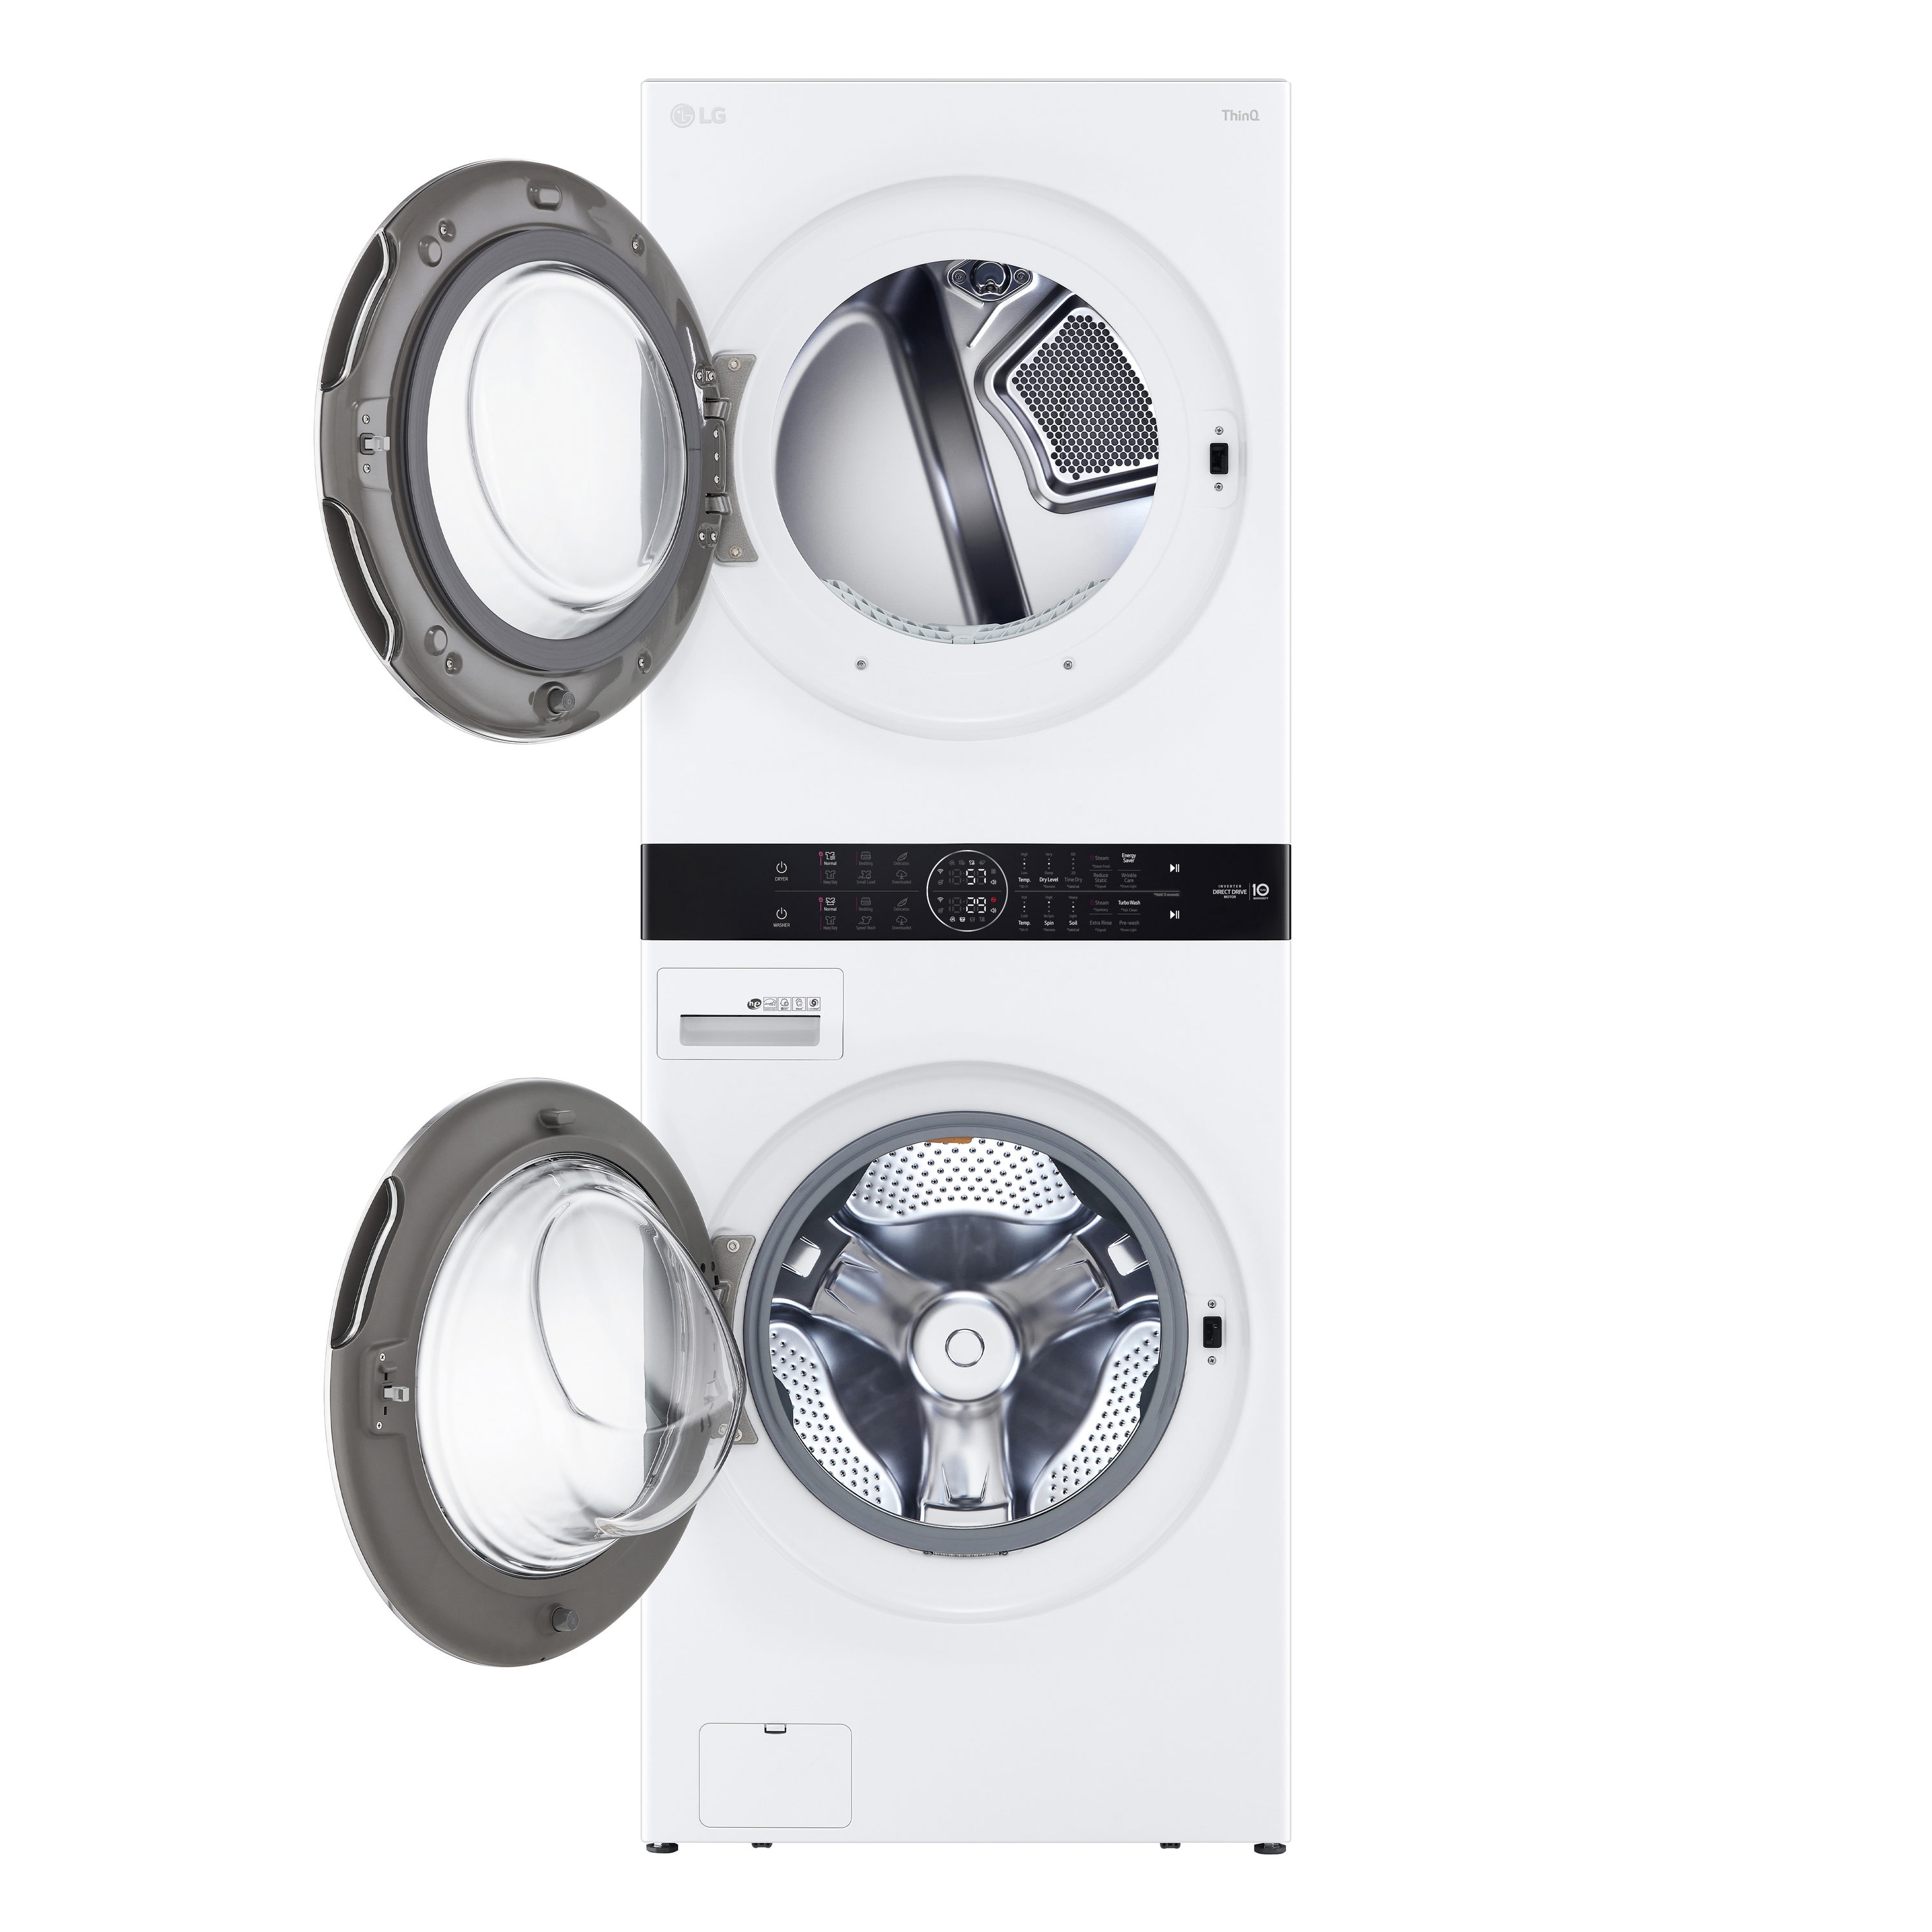 Control Unit Care & Washtower system Steam with Dryer Styler White Single LG Shop Washer at Center